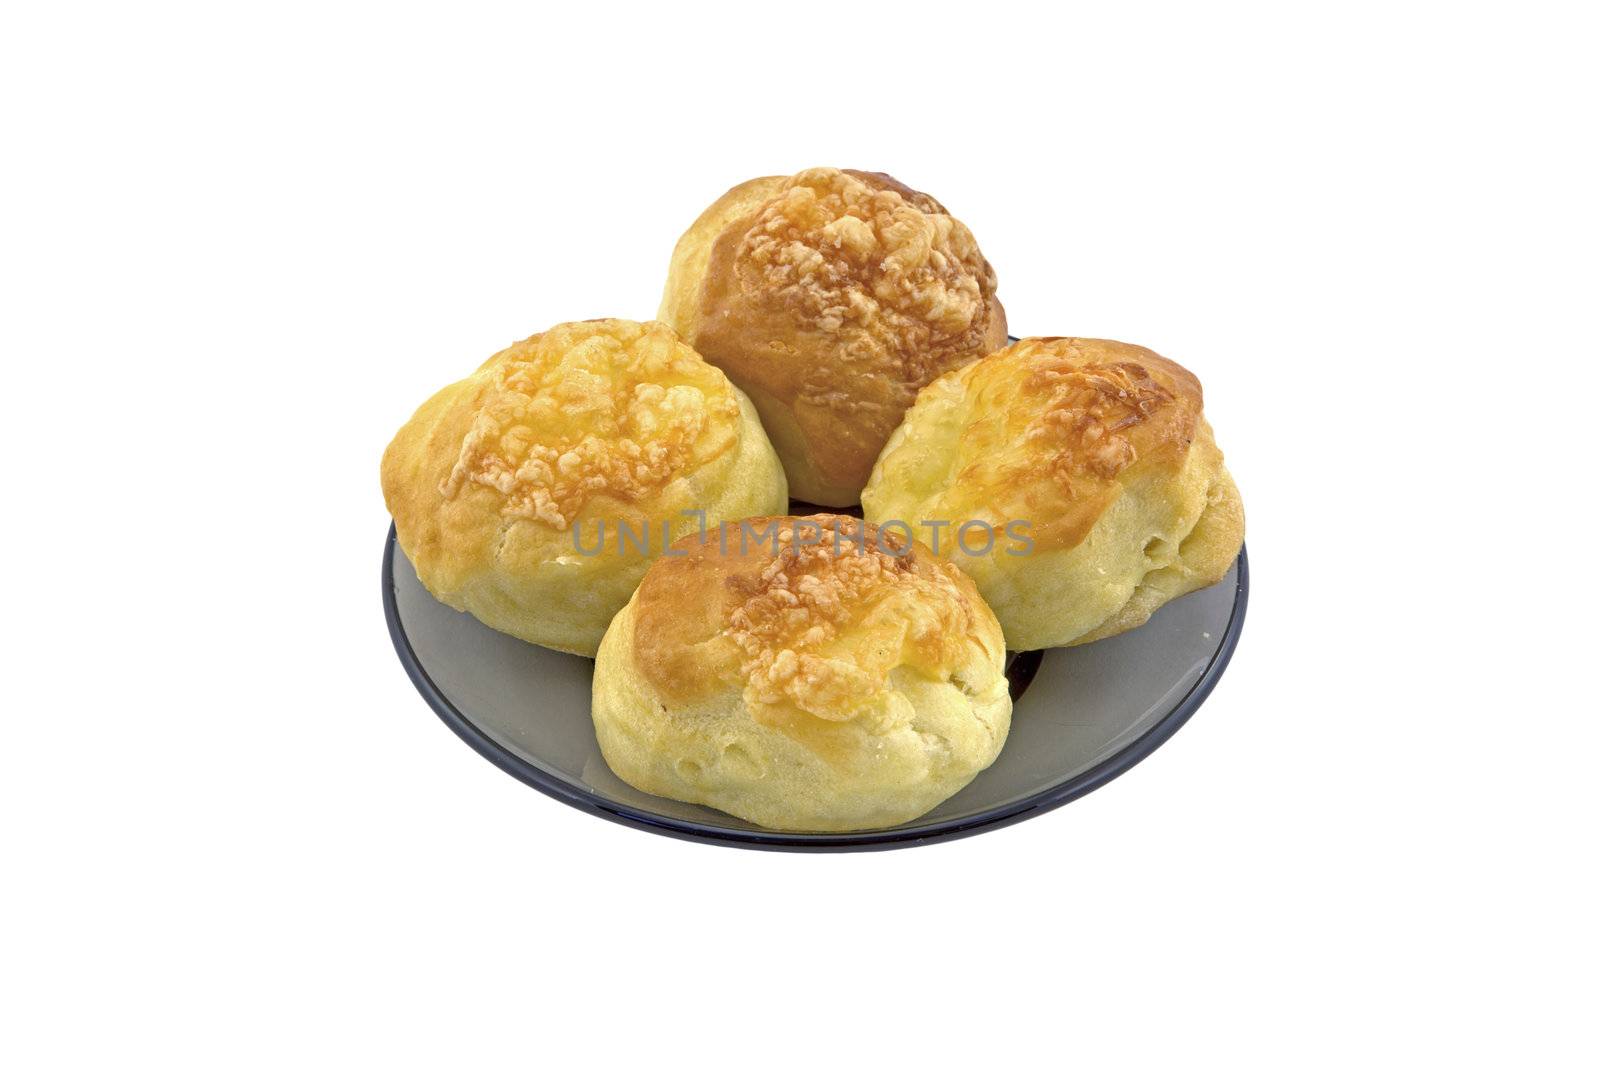 Four scones on a glass plate on white background